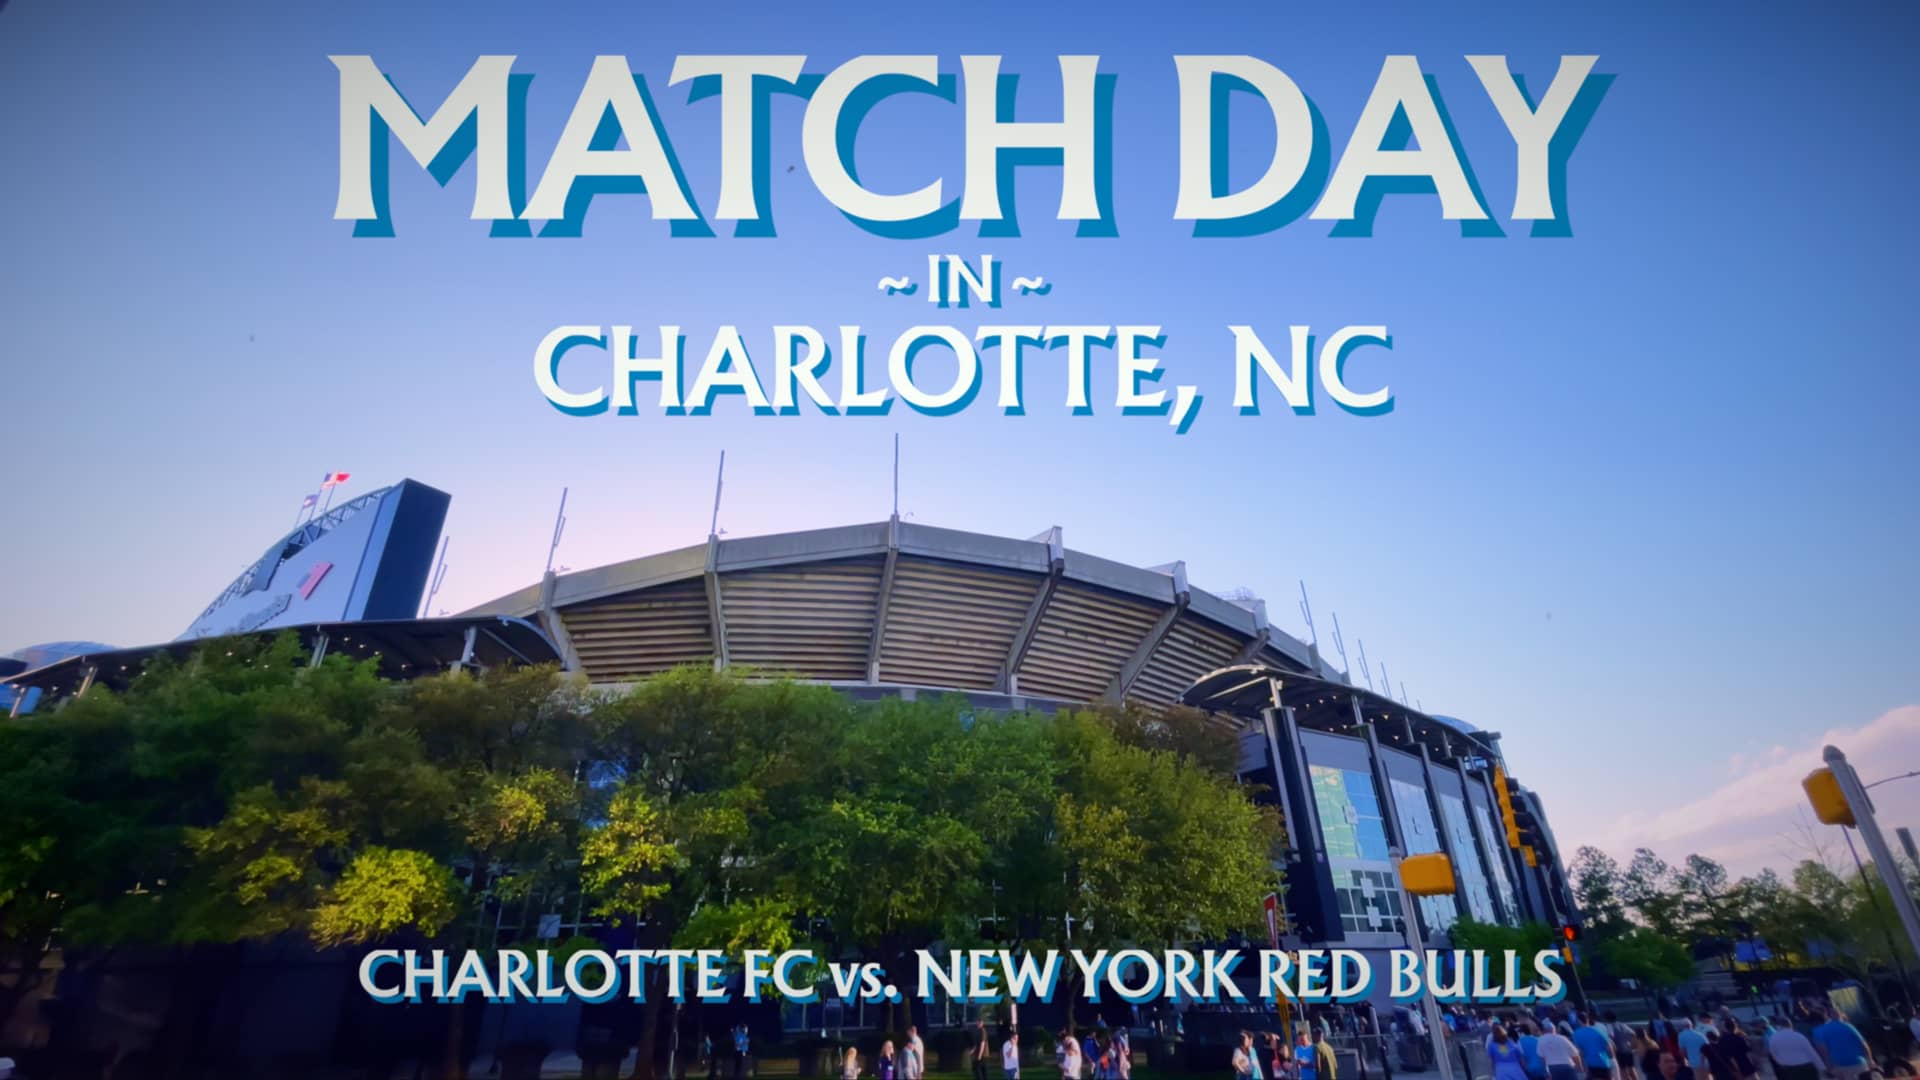 Match Day in Charlotte, NC on Vimeo